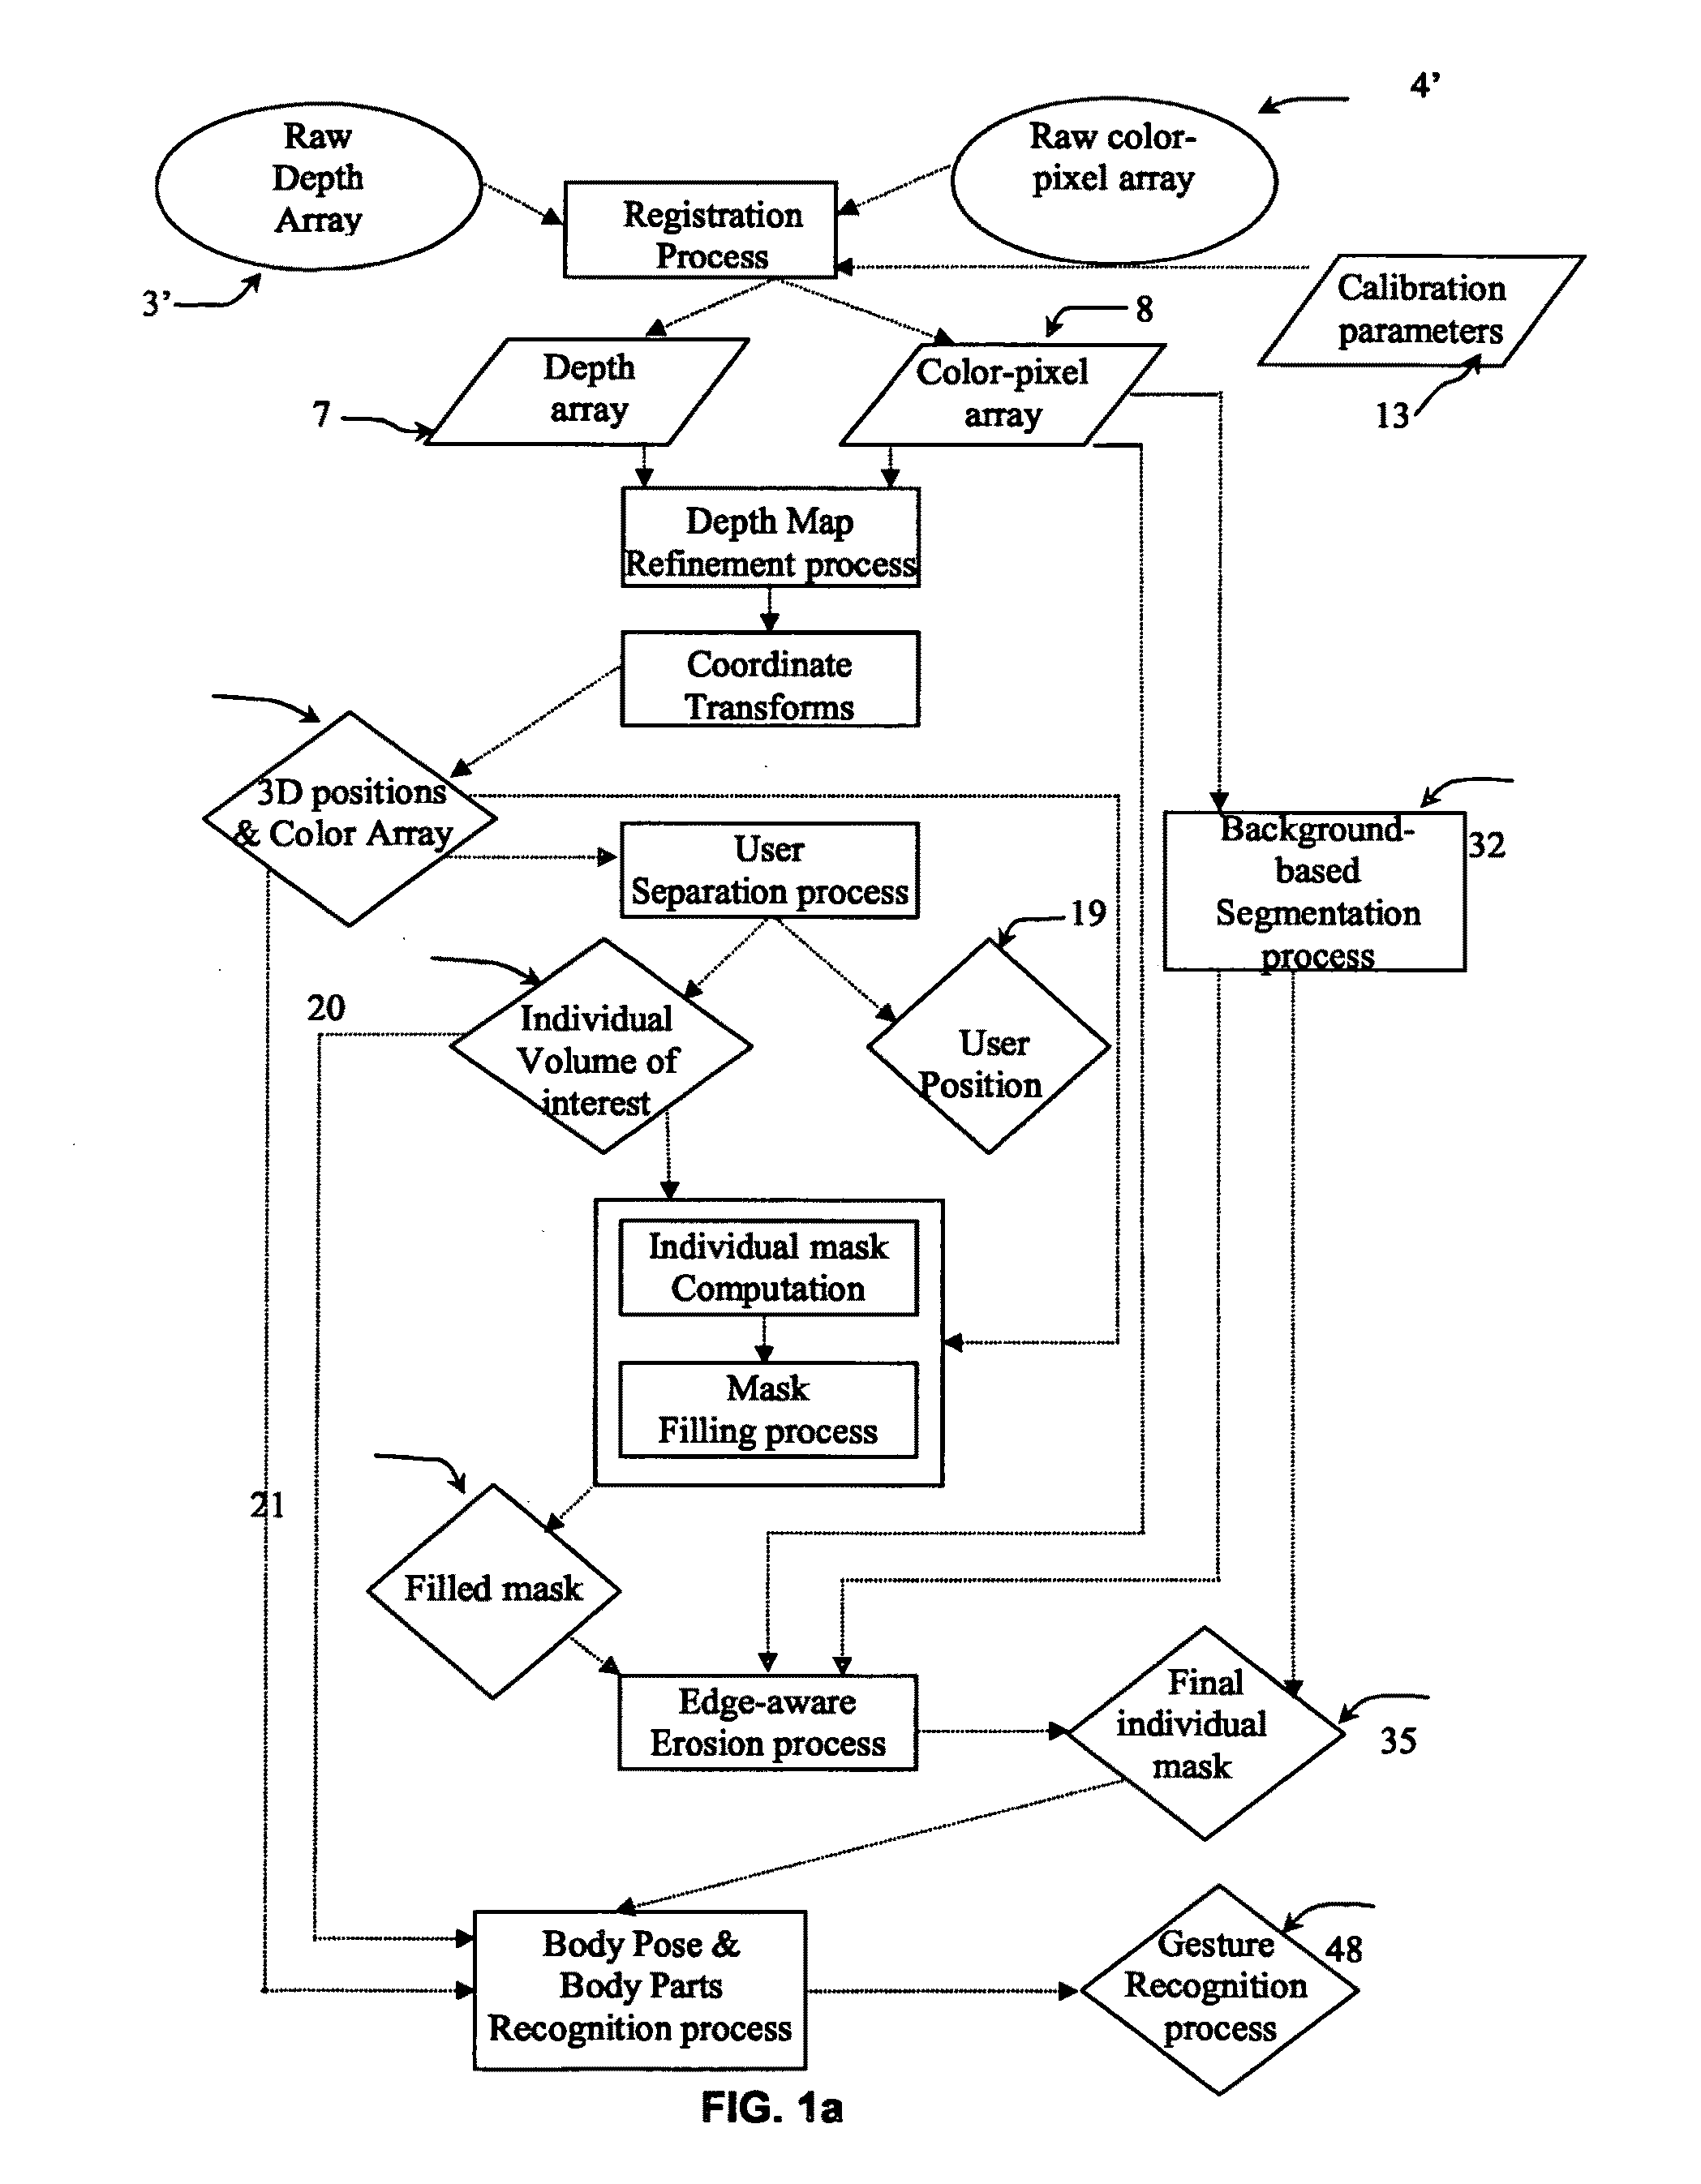 Method and Device for Identifying and Extracting Images of multiple Users, and for Recognizing User Gestures